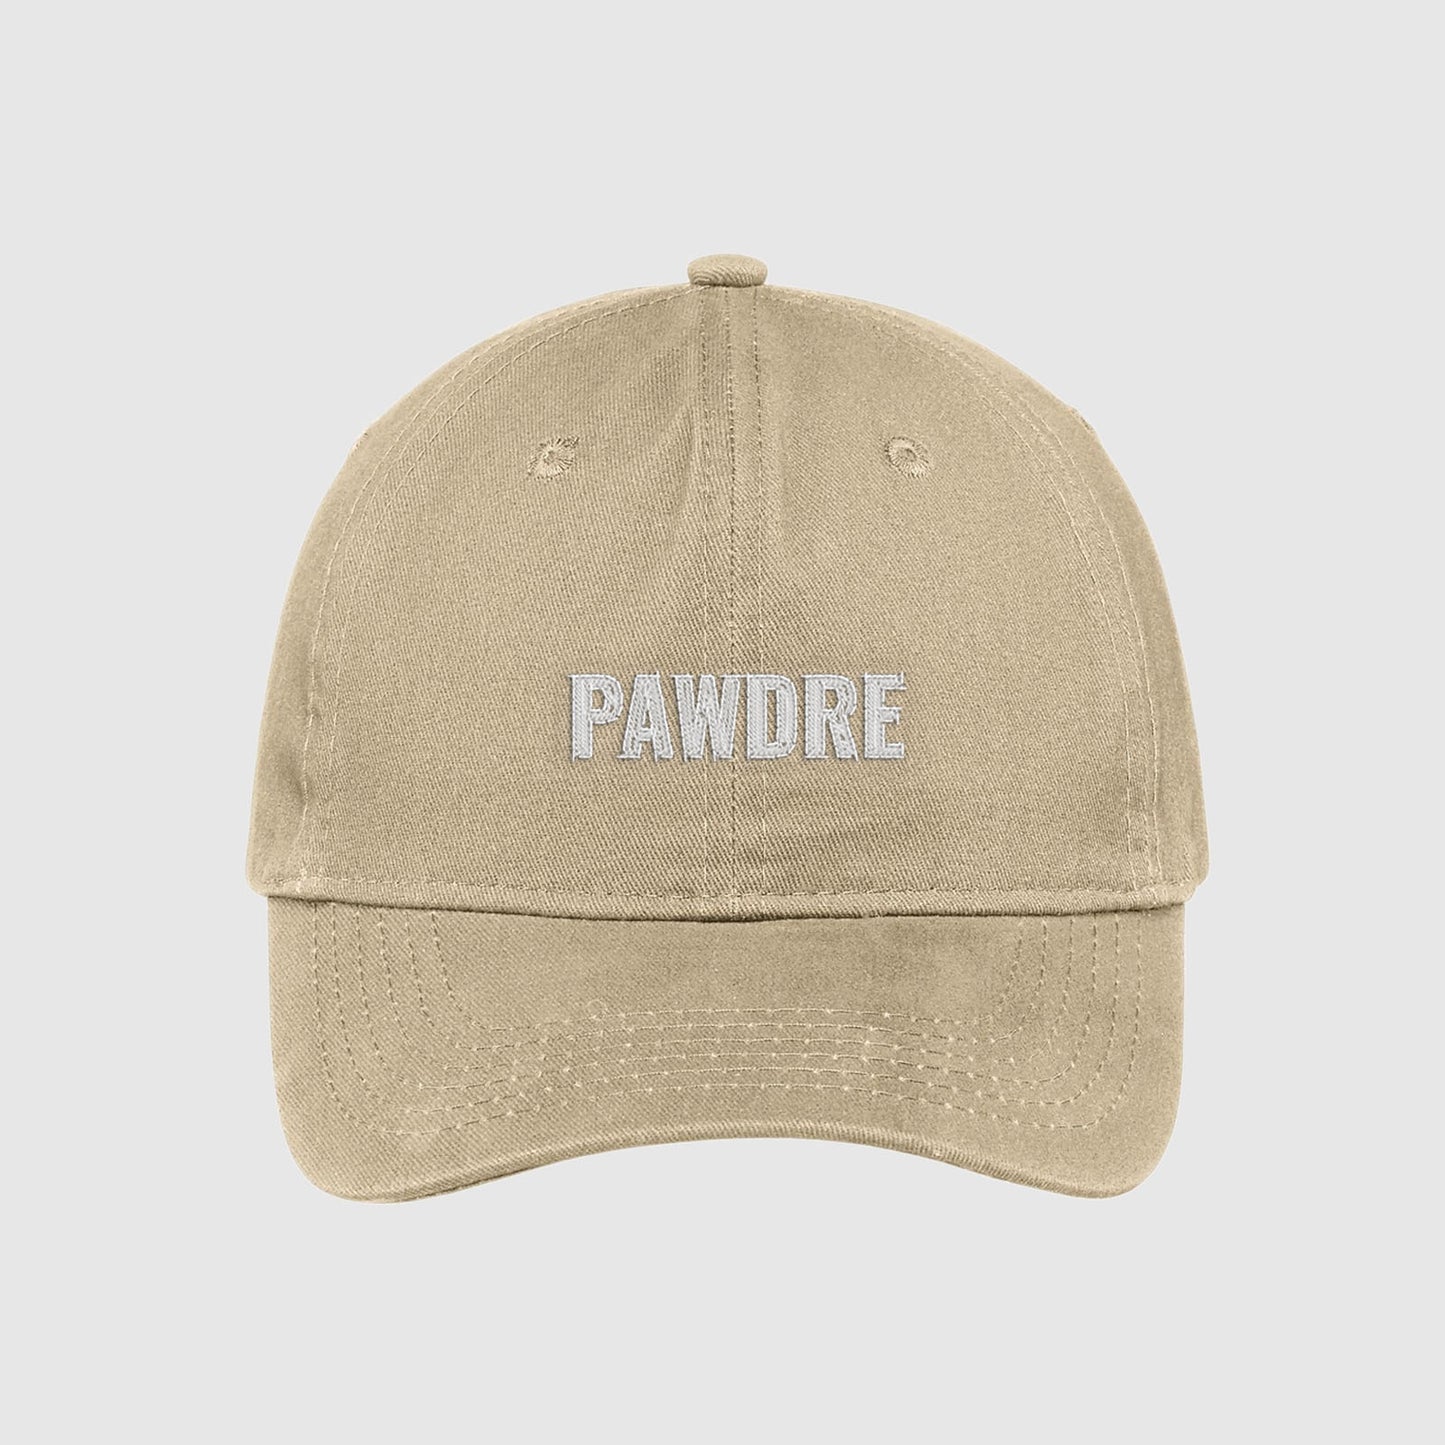 Tan Pawdre Hat embroidered with white text.